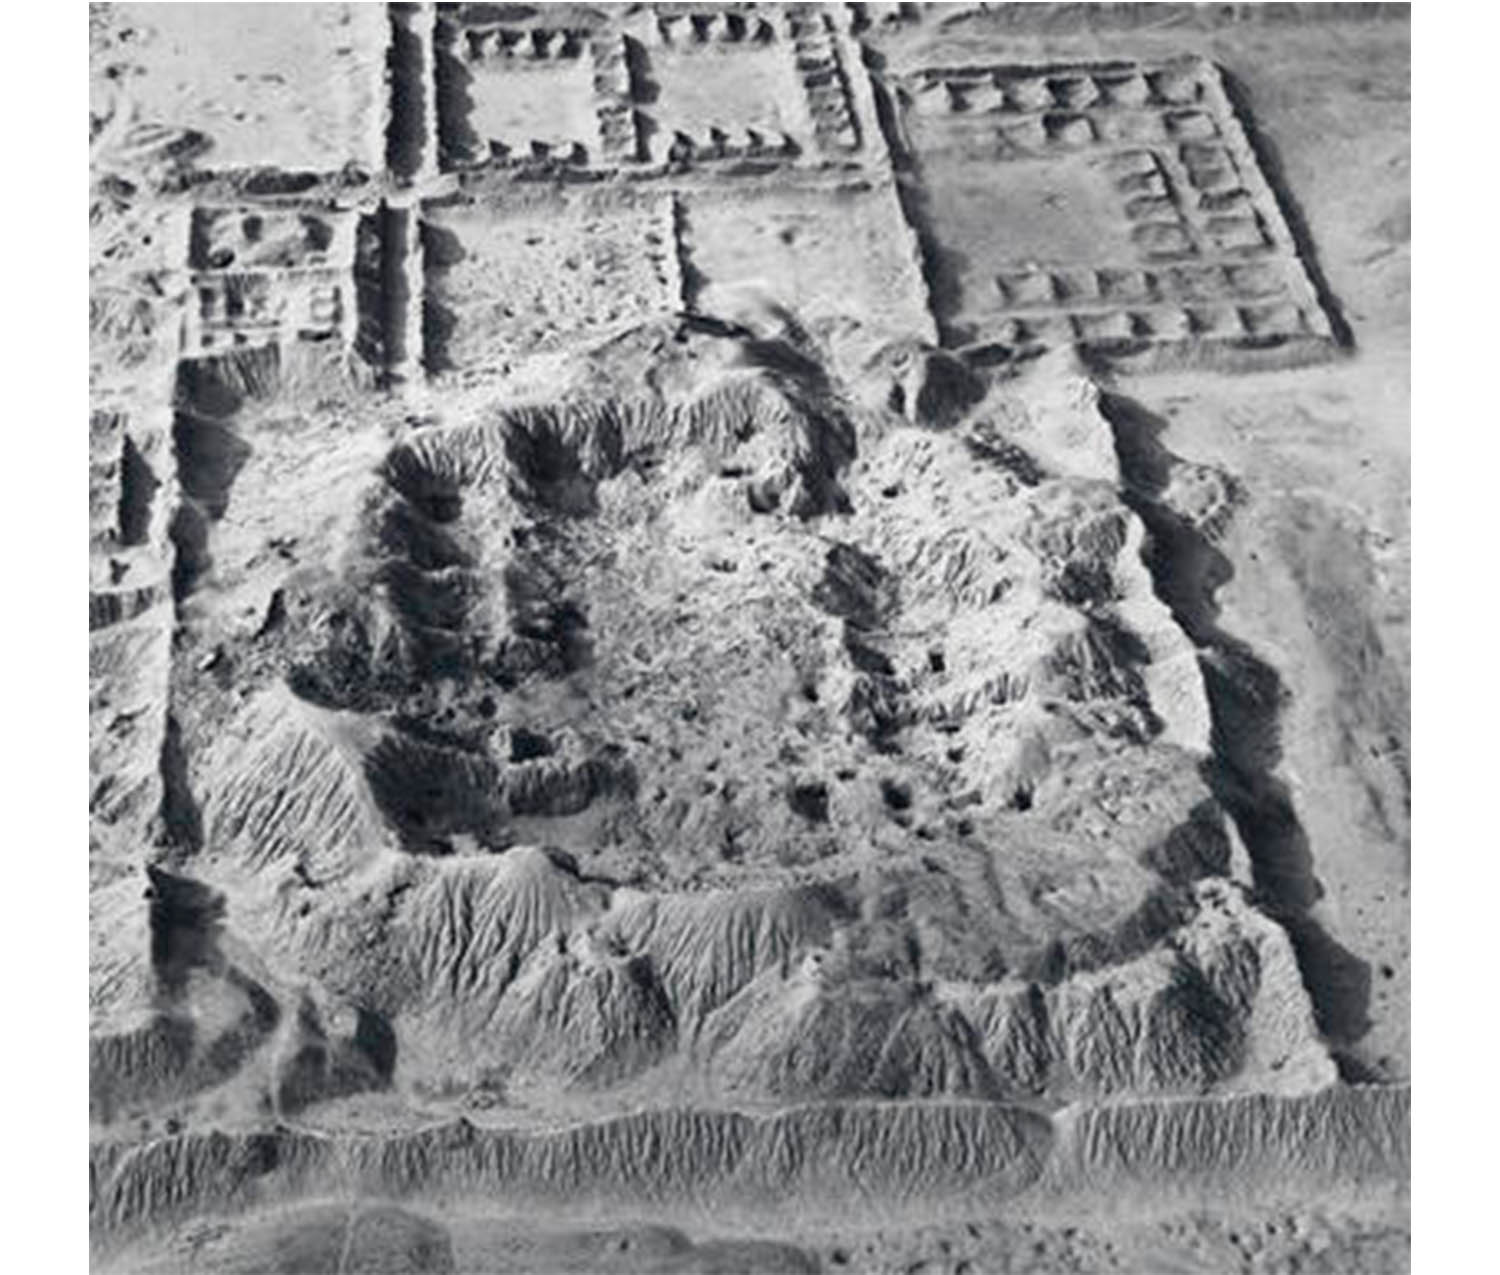 close-up of aerial view of sandy area with low dirk mounds and rectangles of ruined buildings